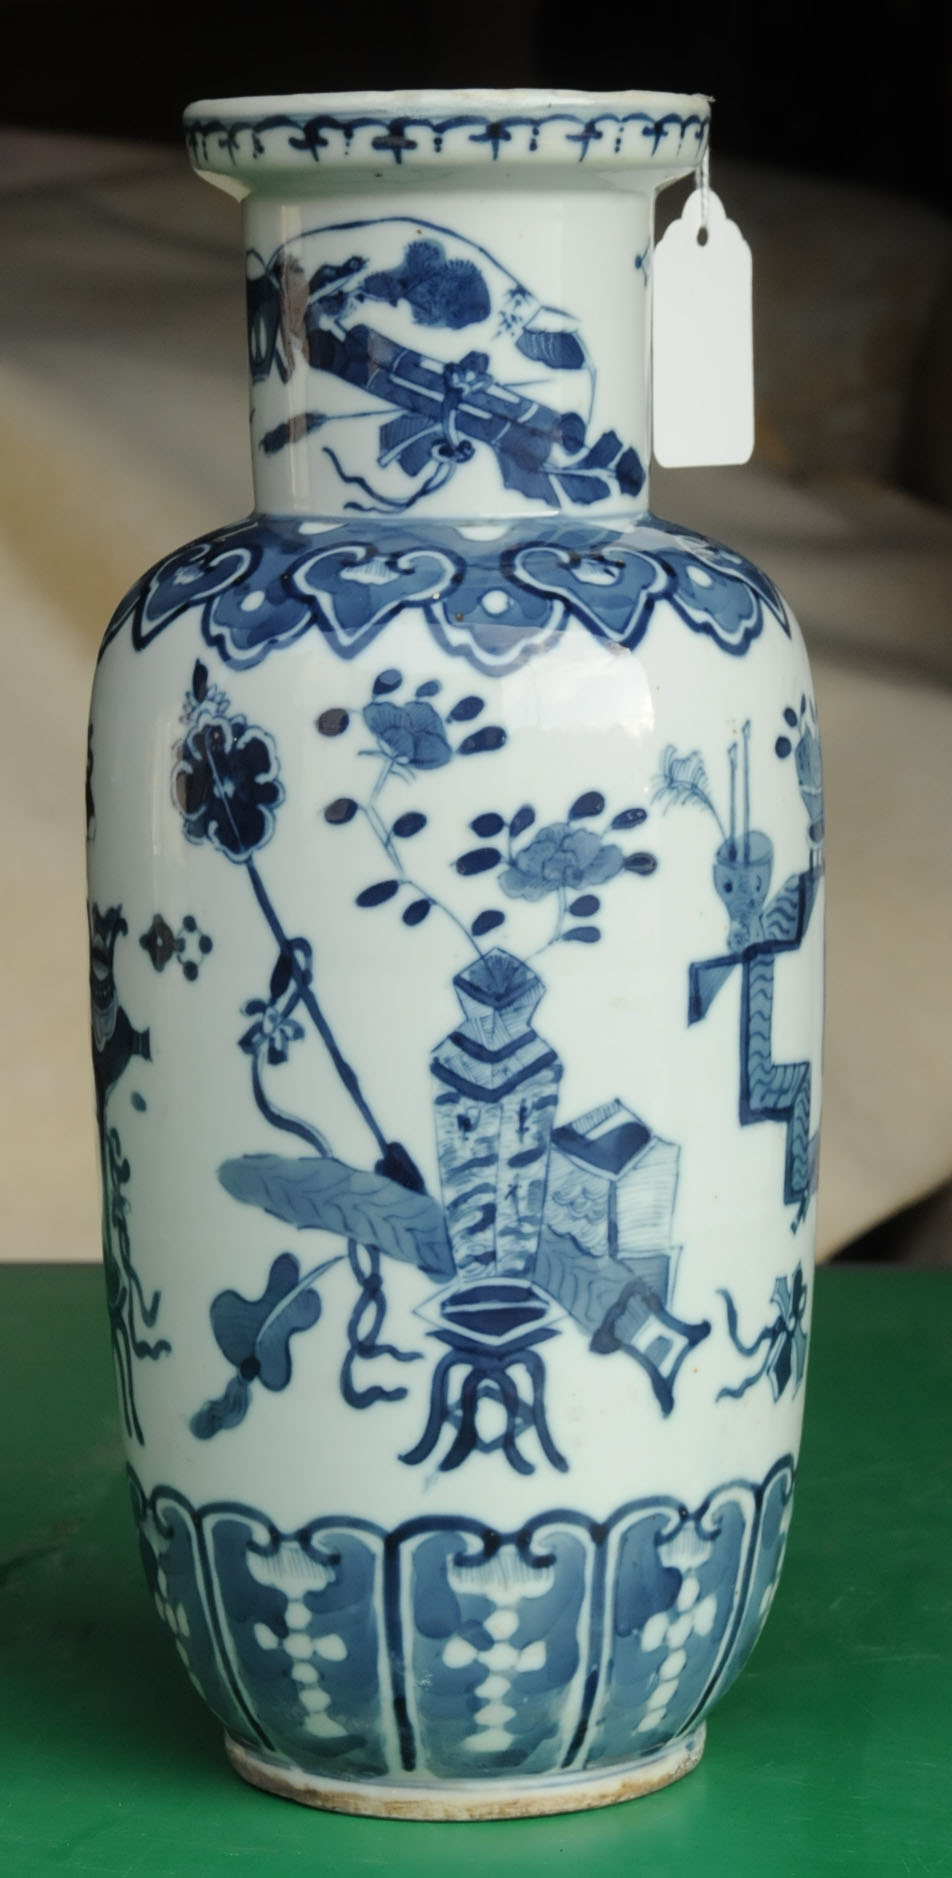 A Chinese blue and white vase, decorated with vases, fish, etc. - Image 5 of 8